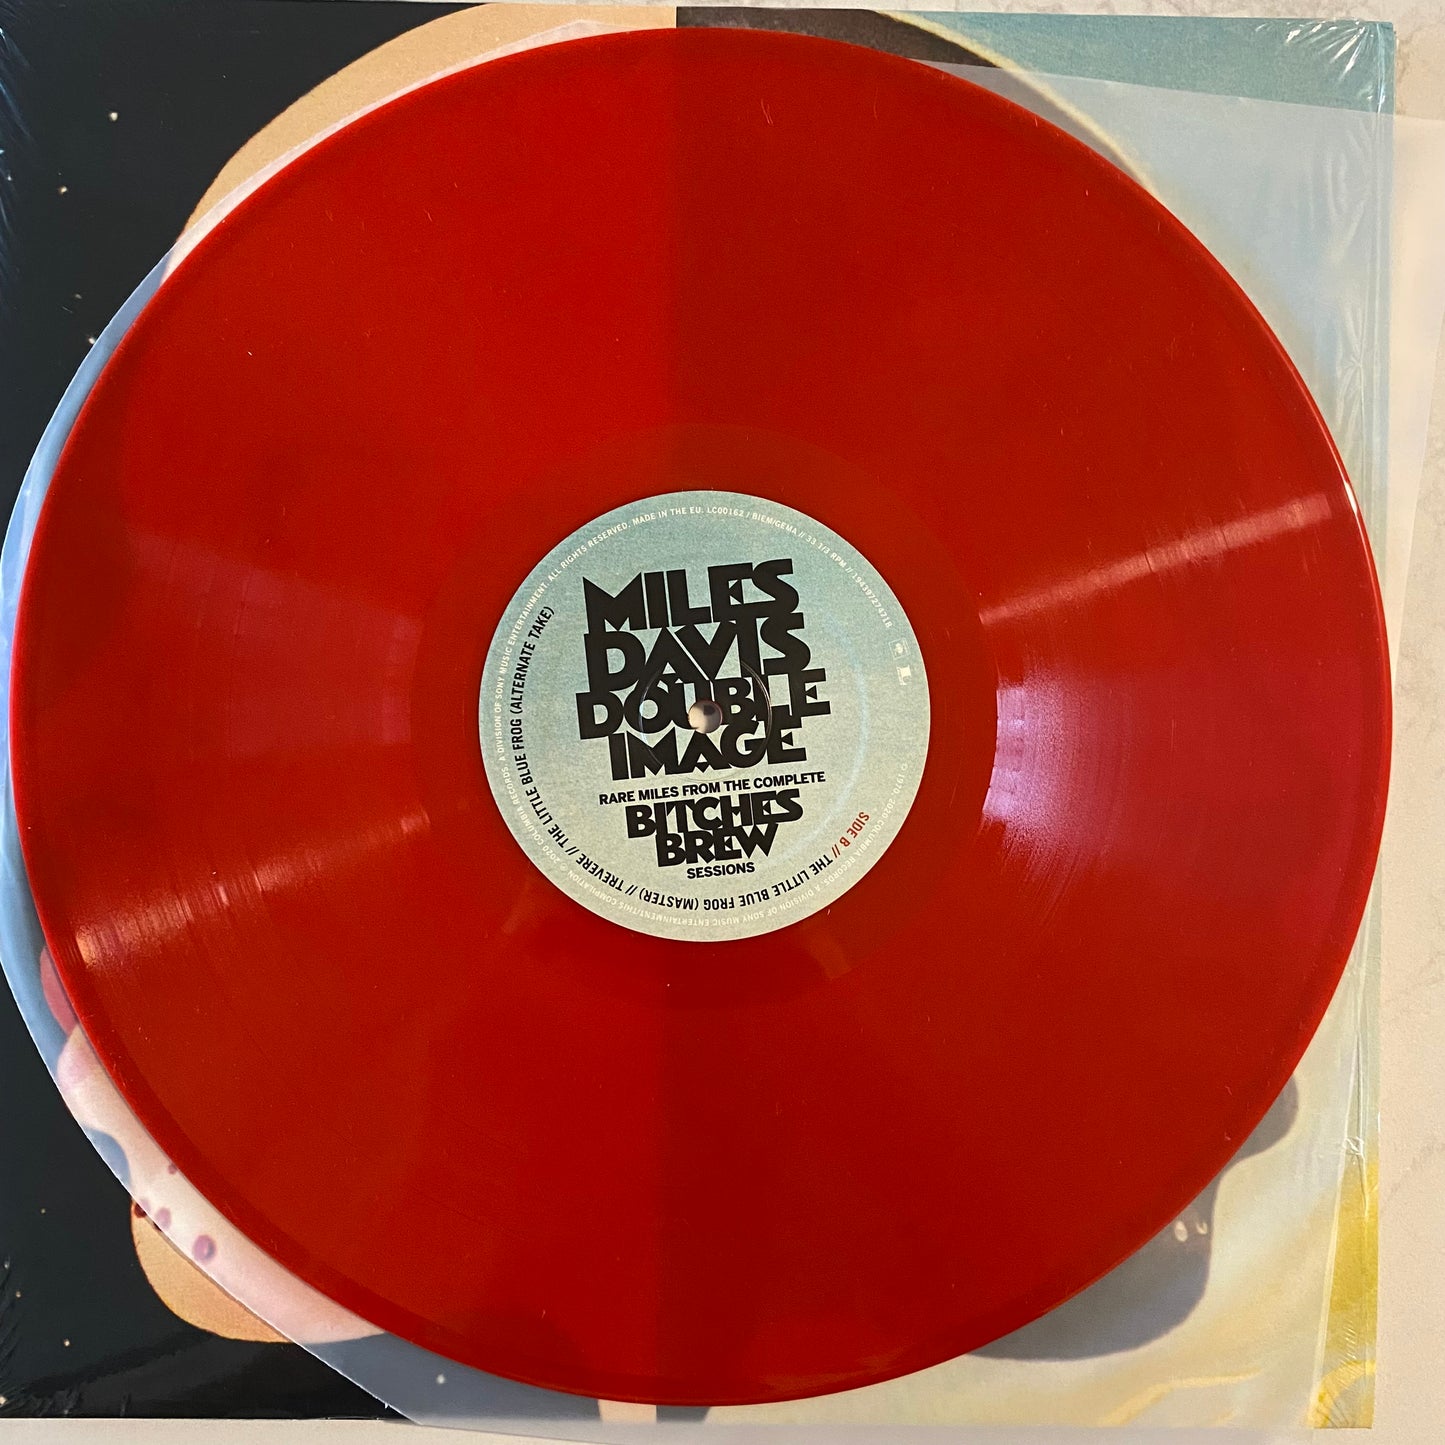 Miles Davis - Double Image (Rare Miles From The Complete Bitches Brew Sessions) (2xLP, Album, RSD, Comp, Red)